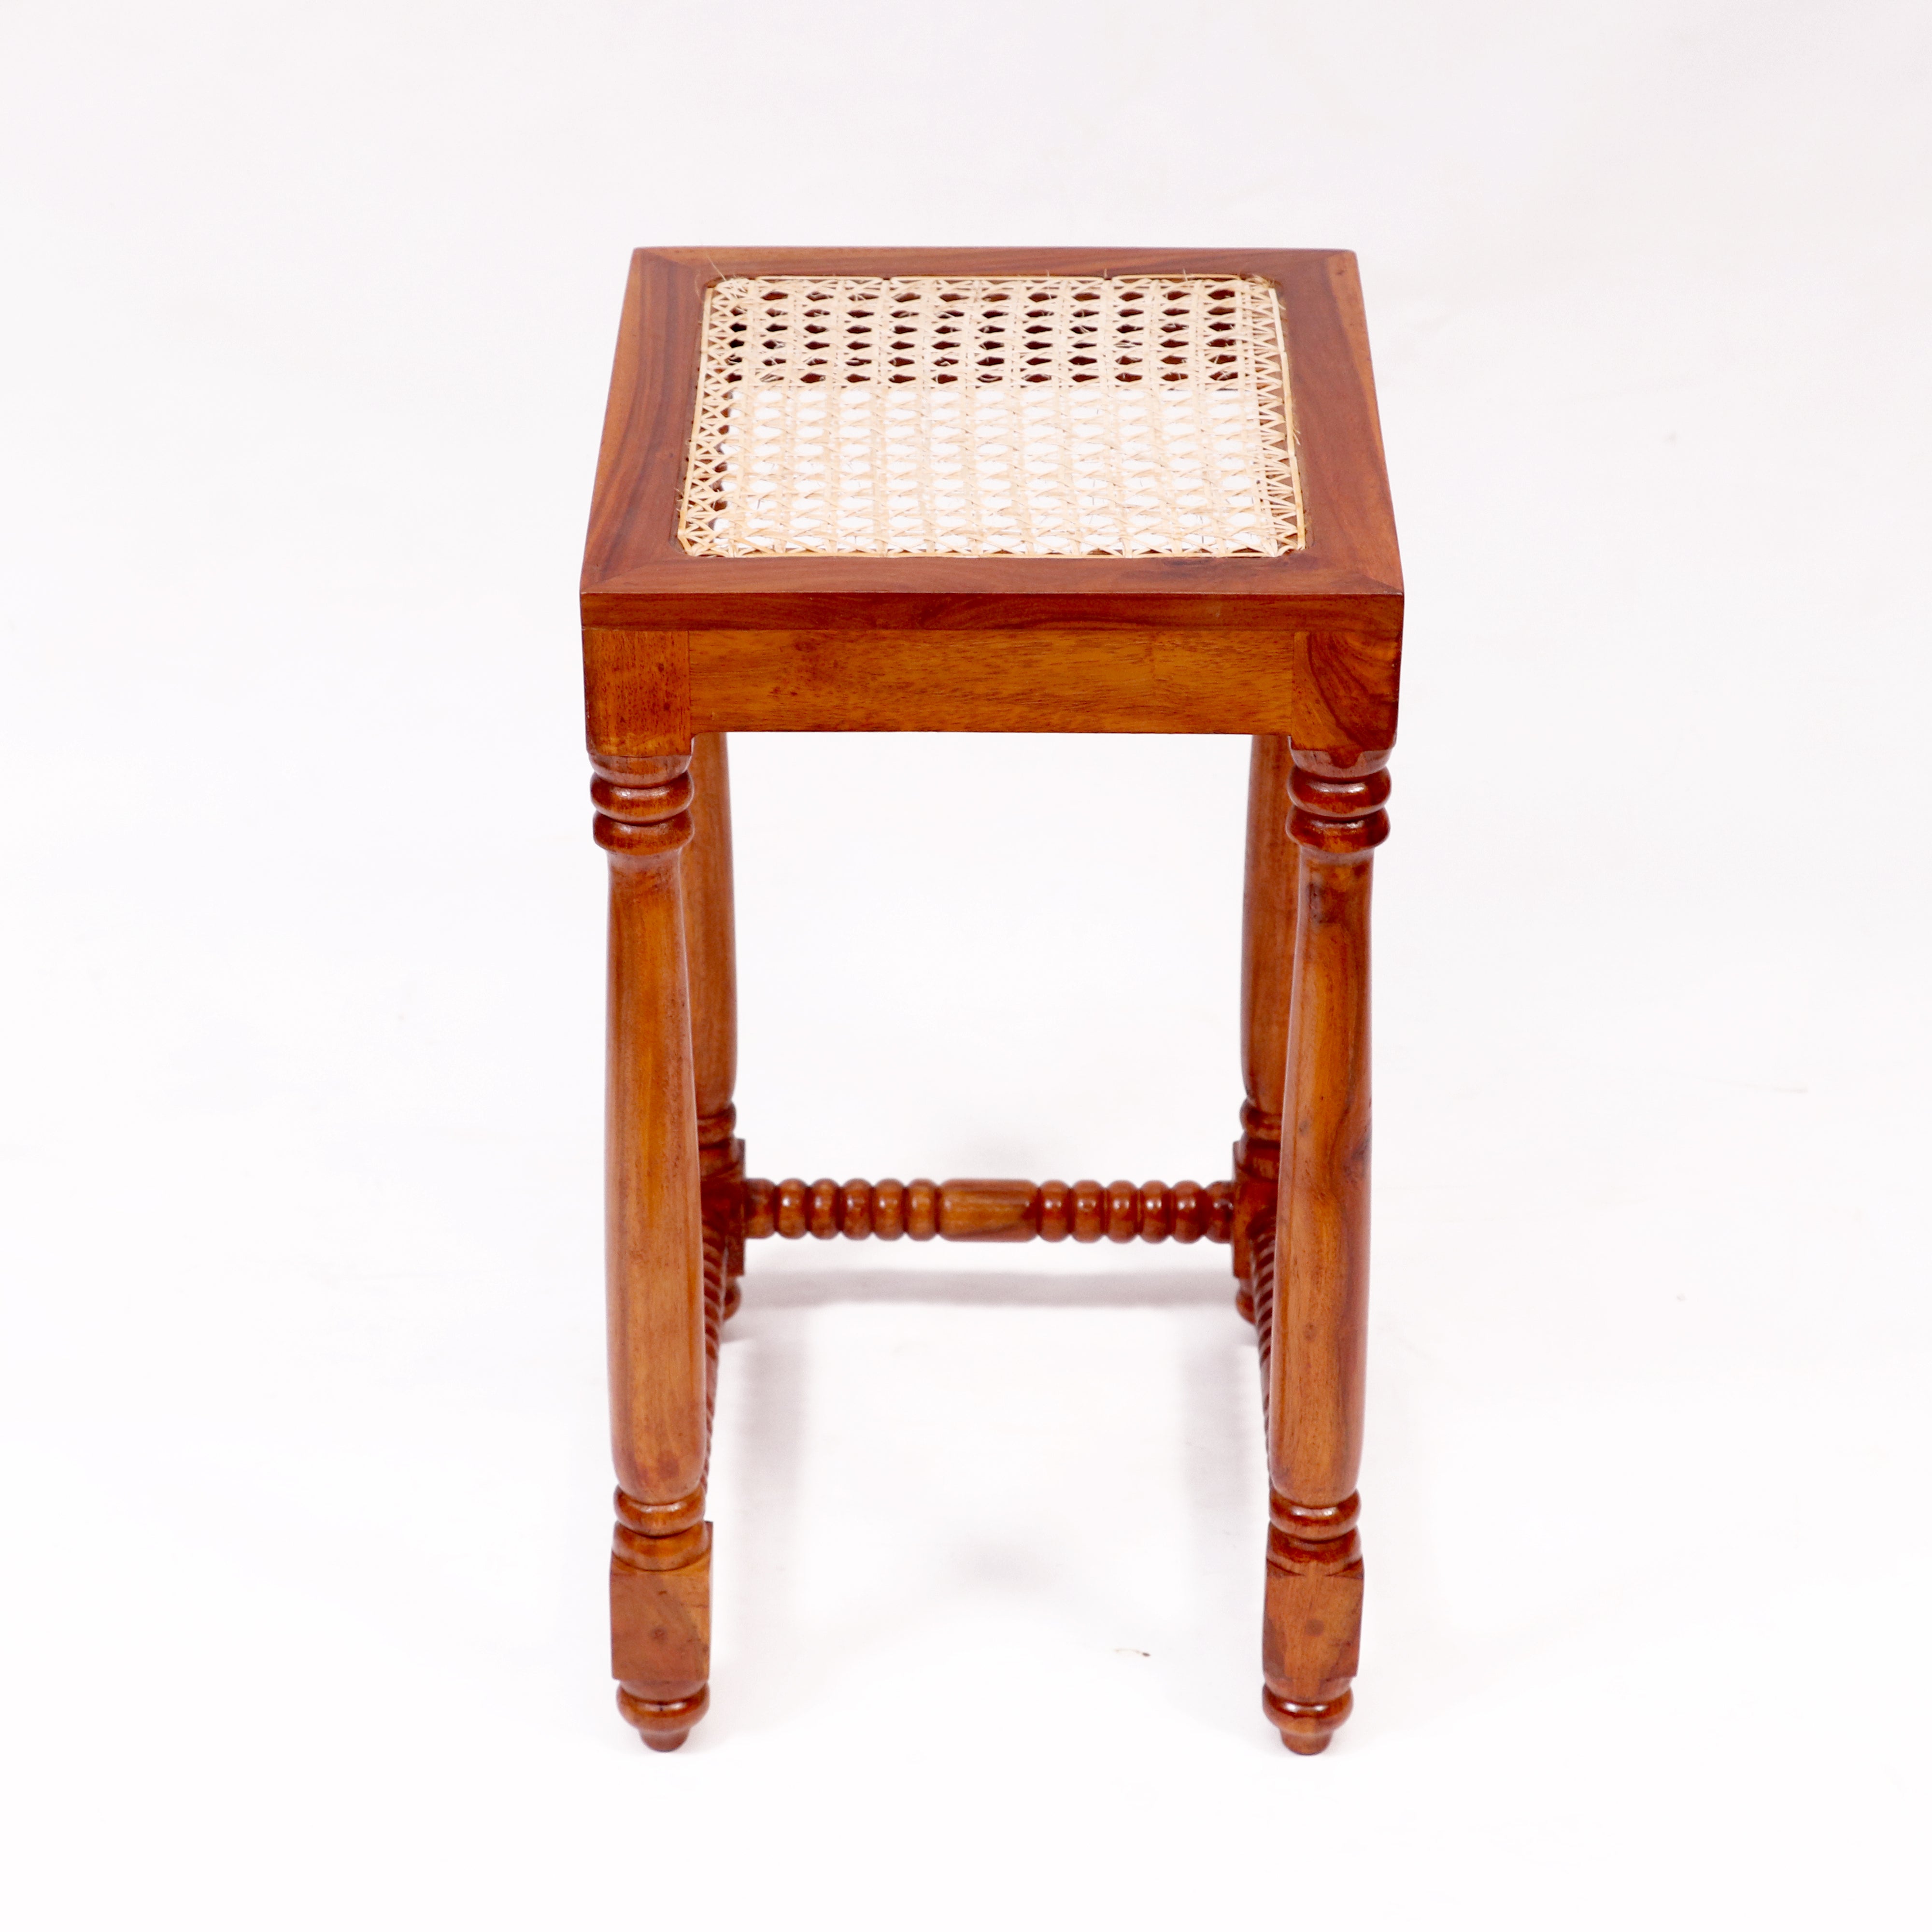 Classic Wooden Cane Nest Tables (Stool) Stool